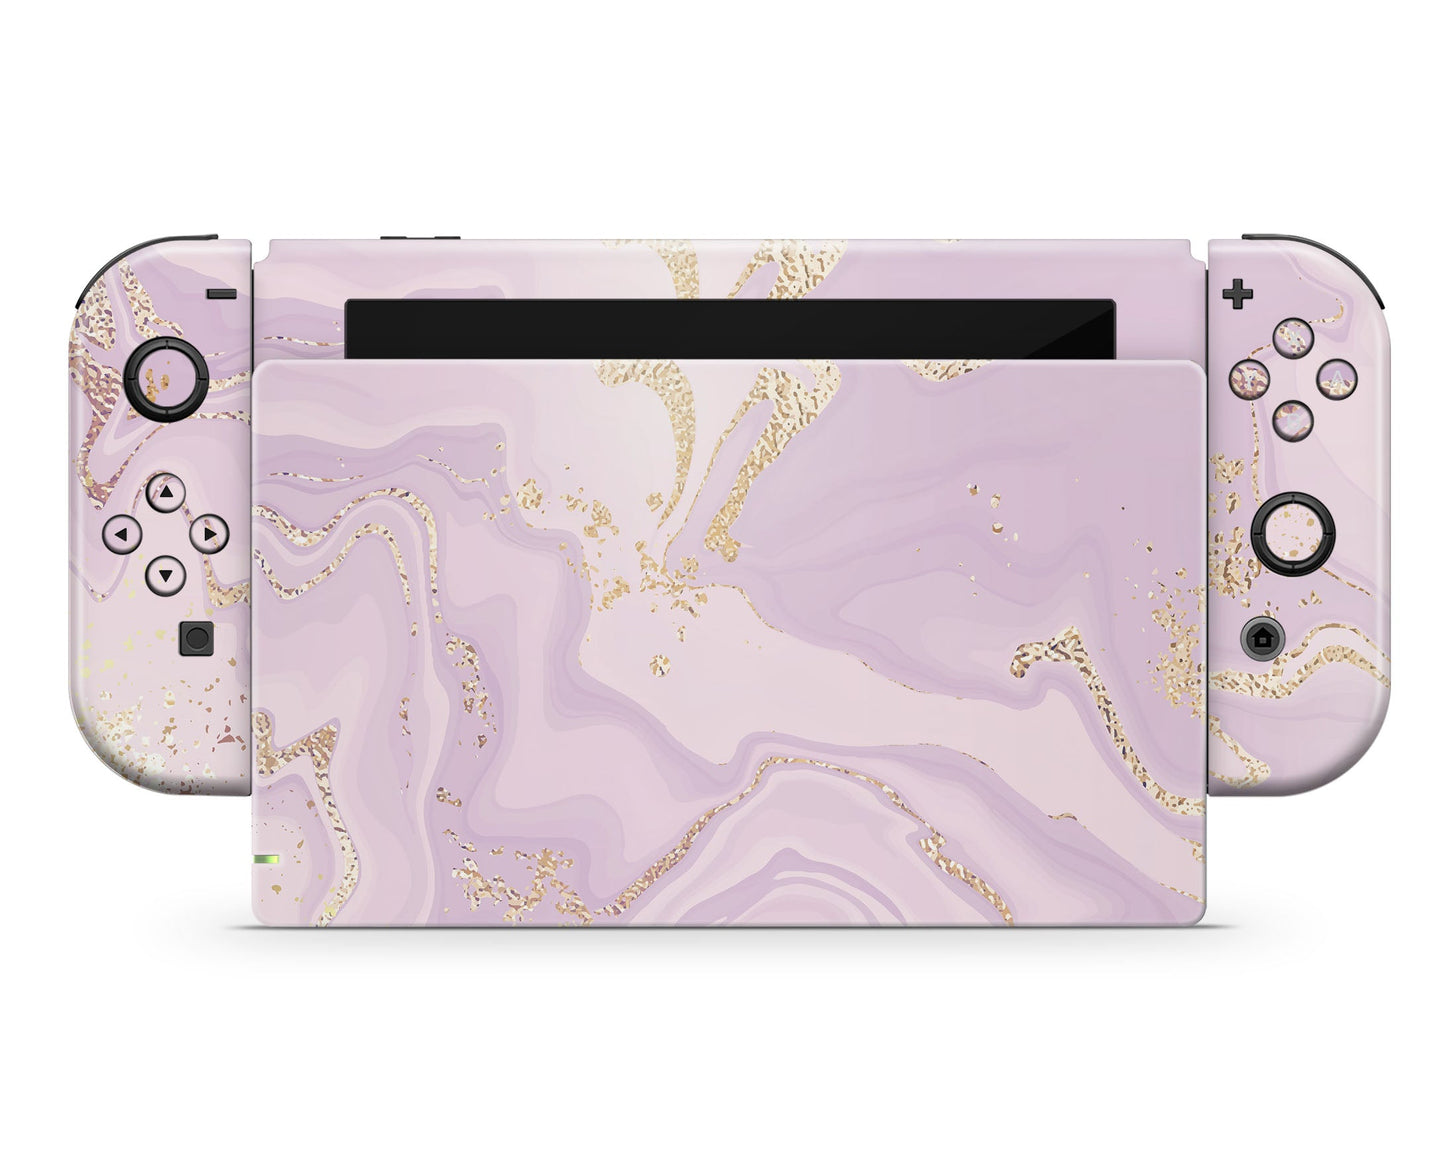 Lux Skins Nintendo Switch Ethereal Lavender Marble Joycons Only Skins - Pattern Marble Skin